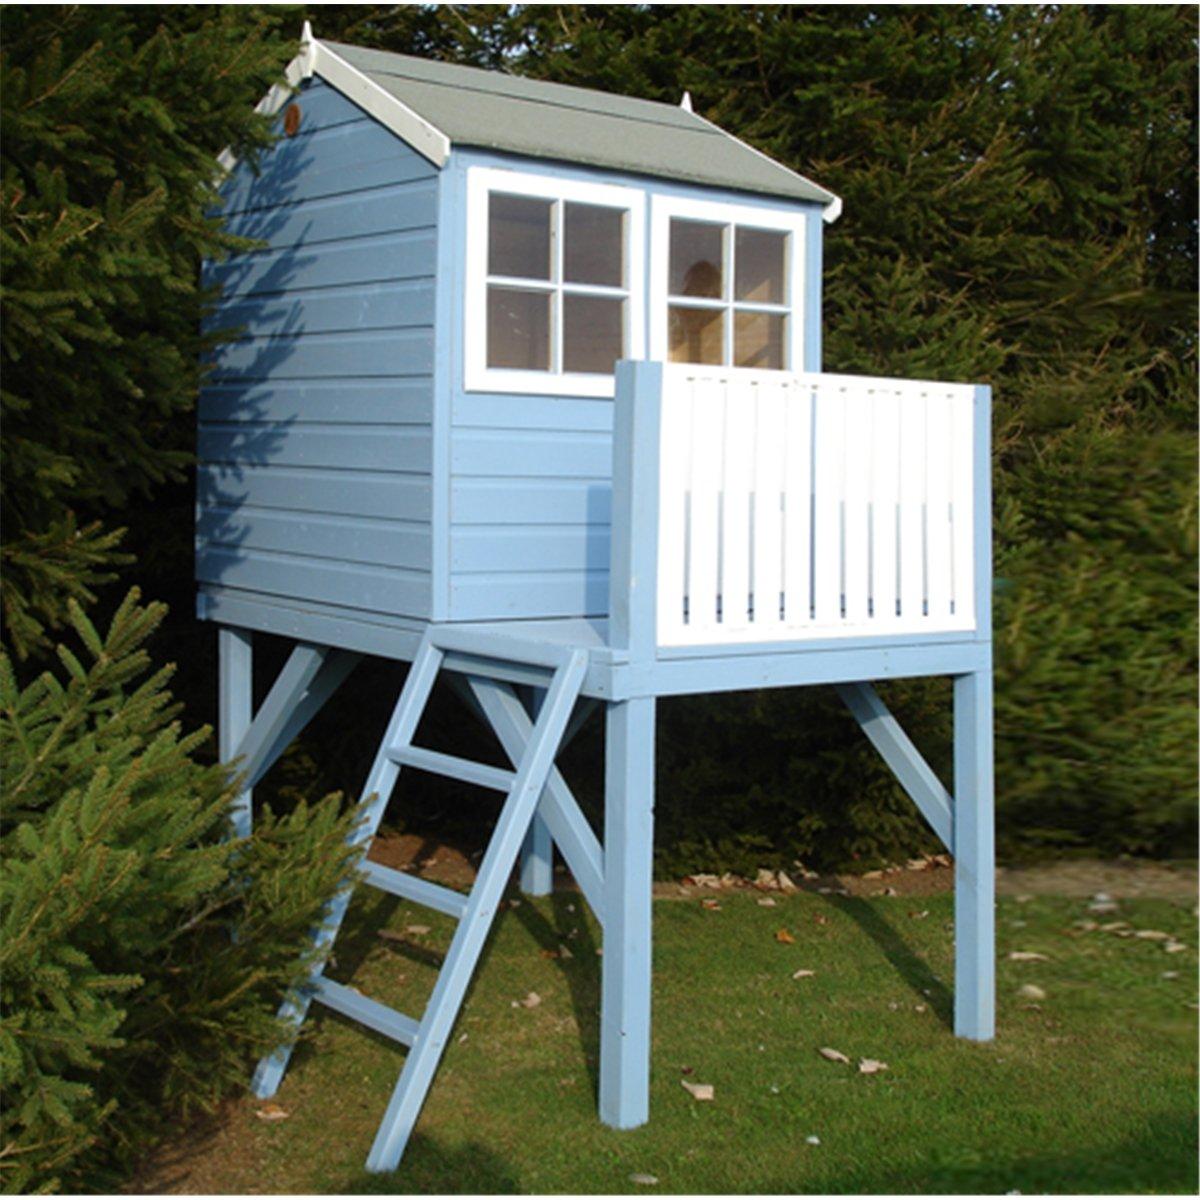 4 x 6 Wooden Tower Playhouse